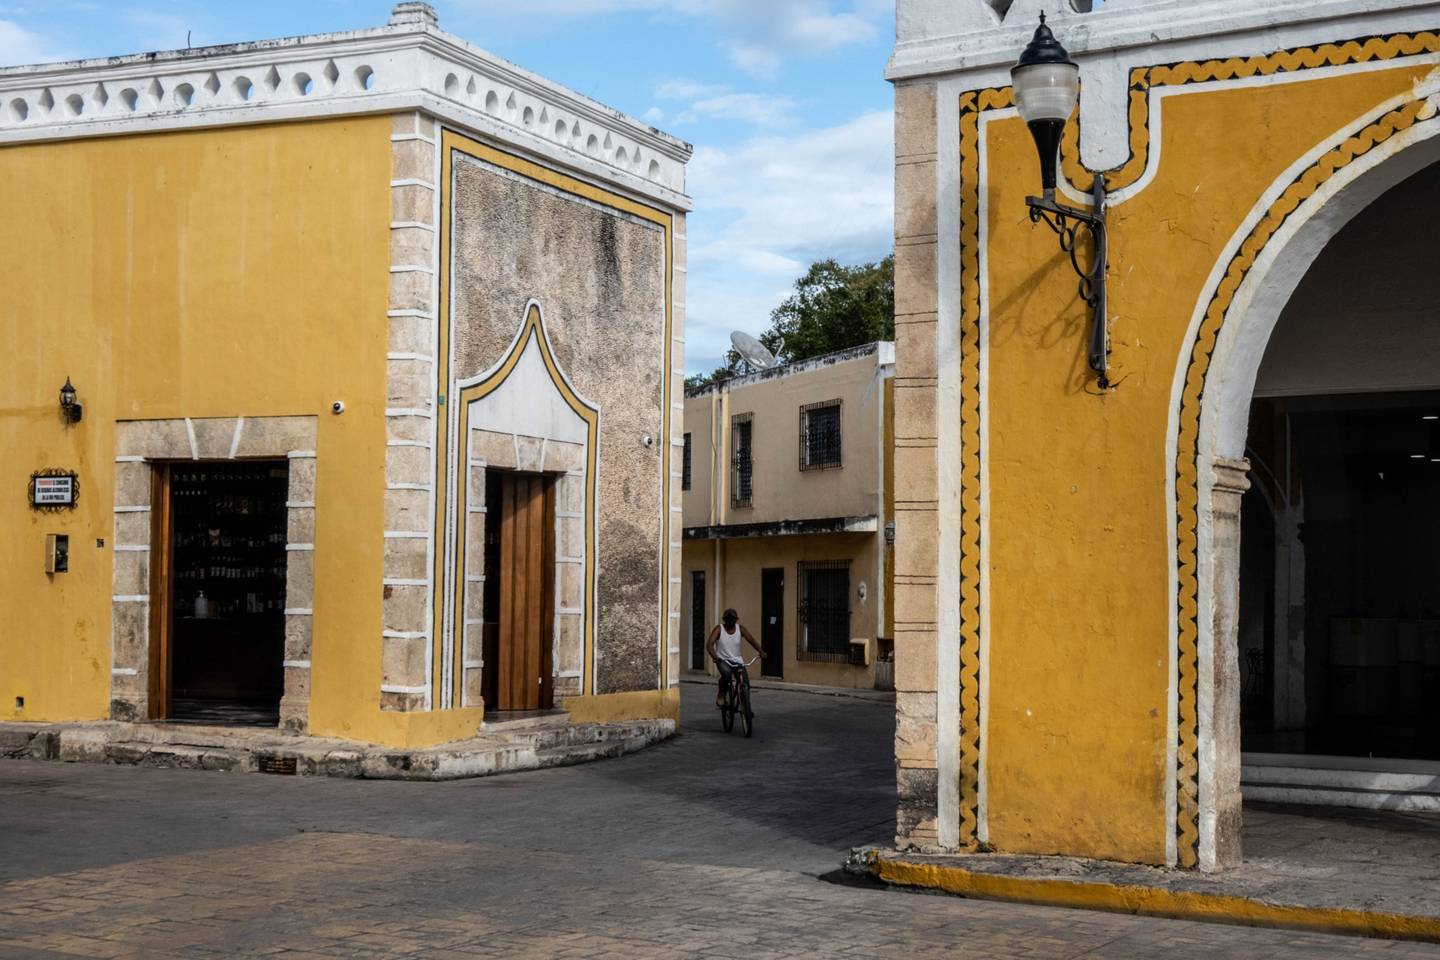 A resident rides a bicycle in the city center of Izamal, Yucatán, Mexico.dfd